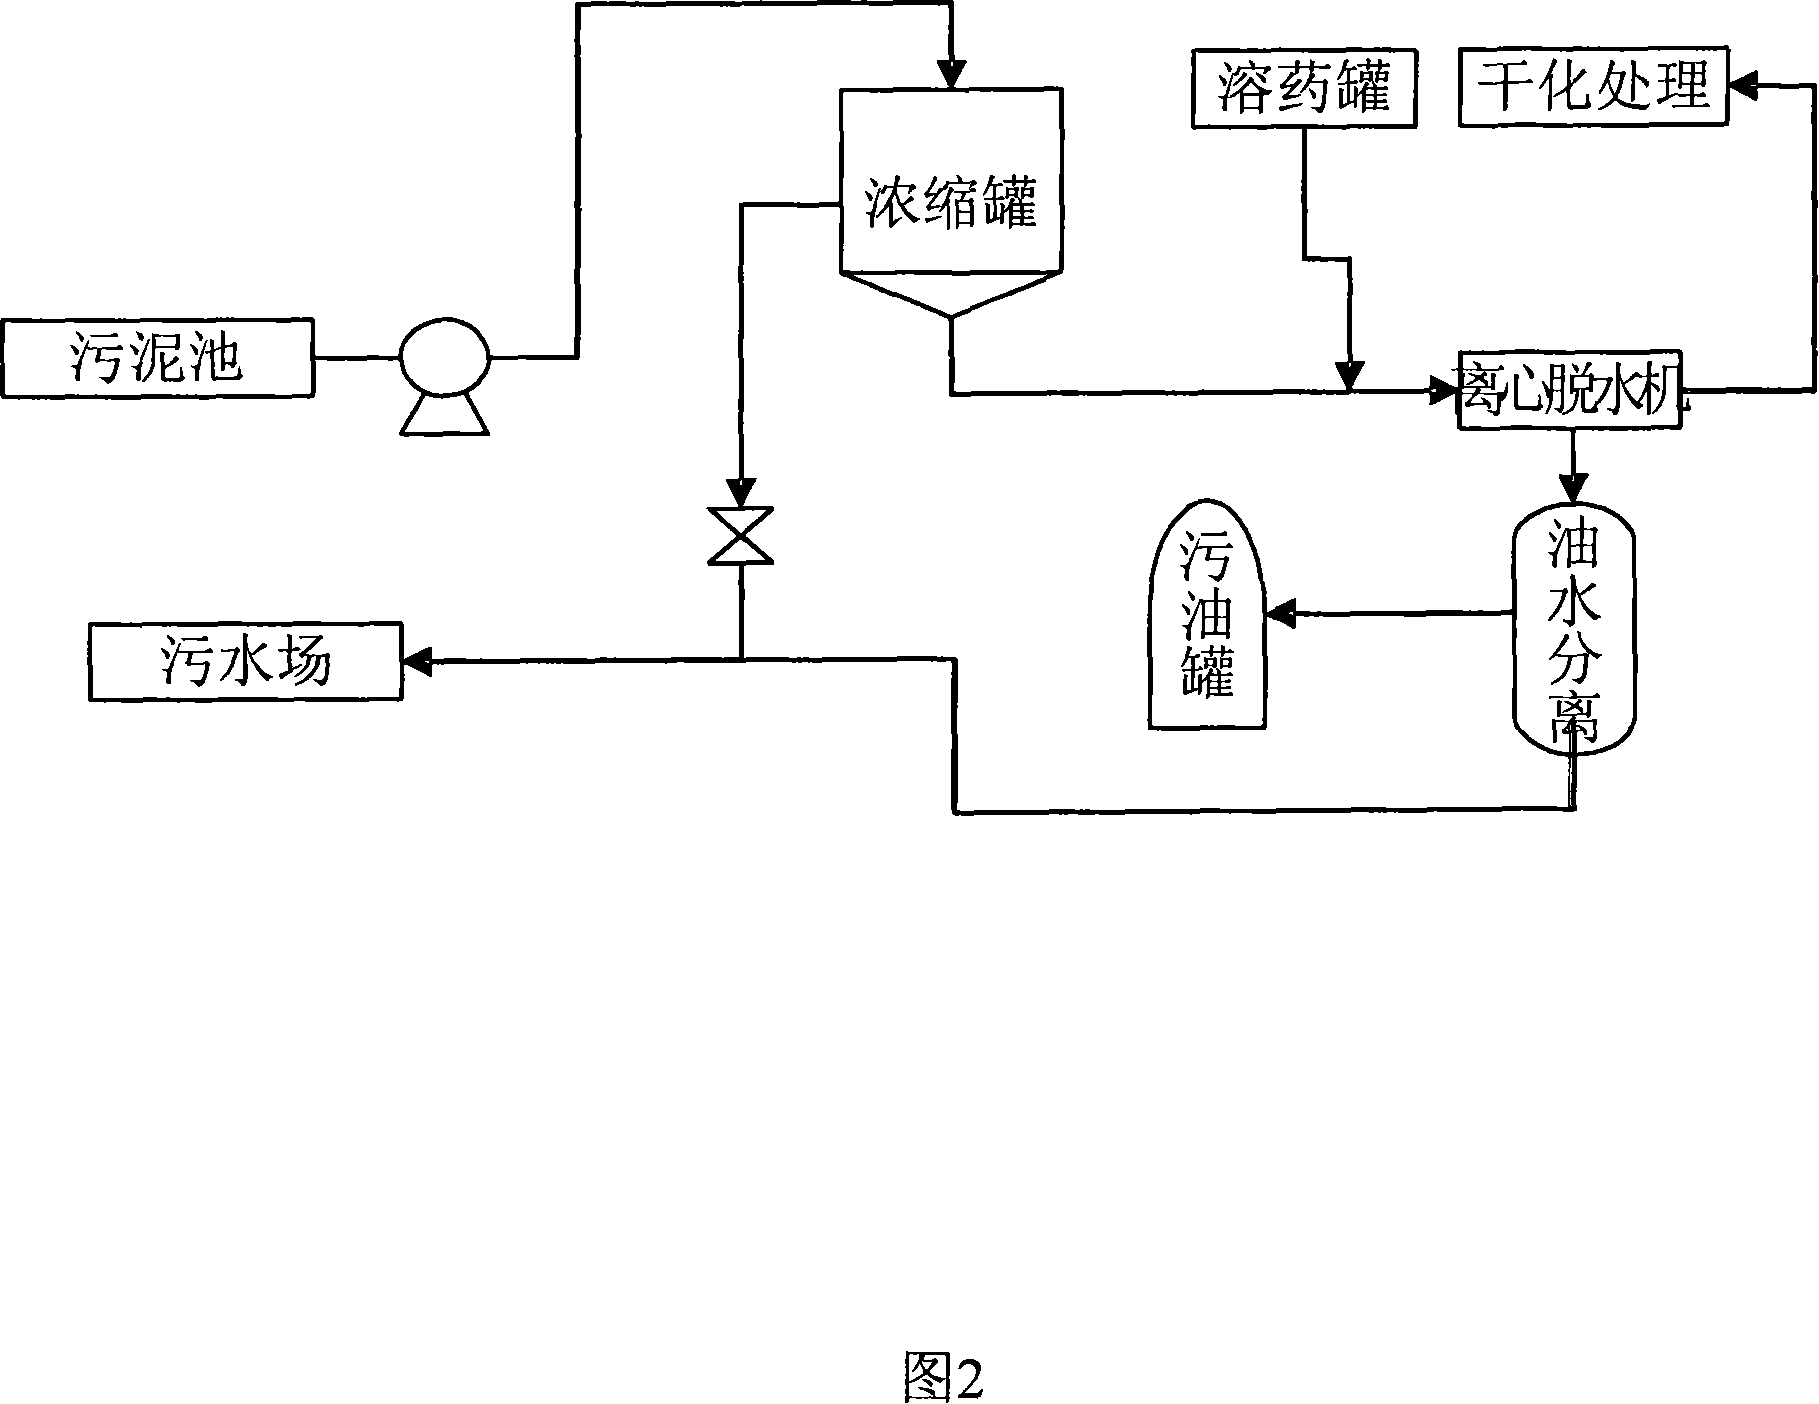 Process for treating oil-containing sludge